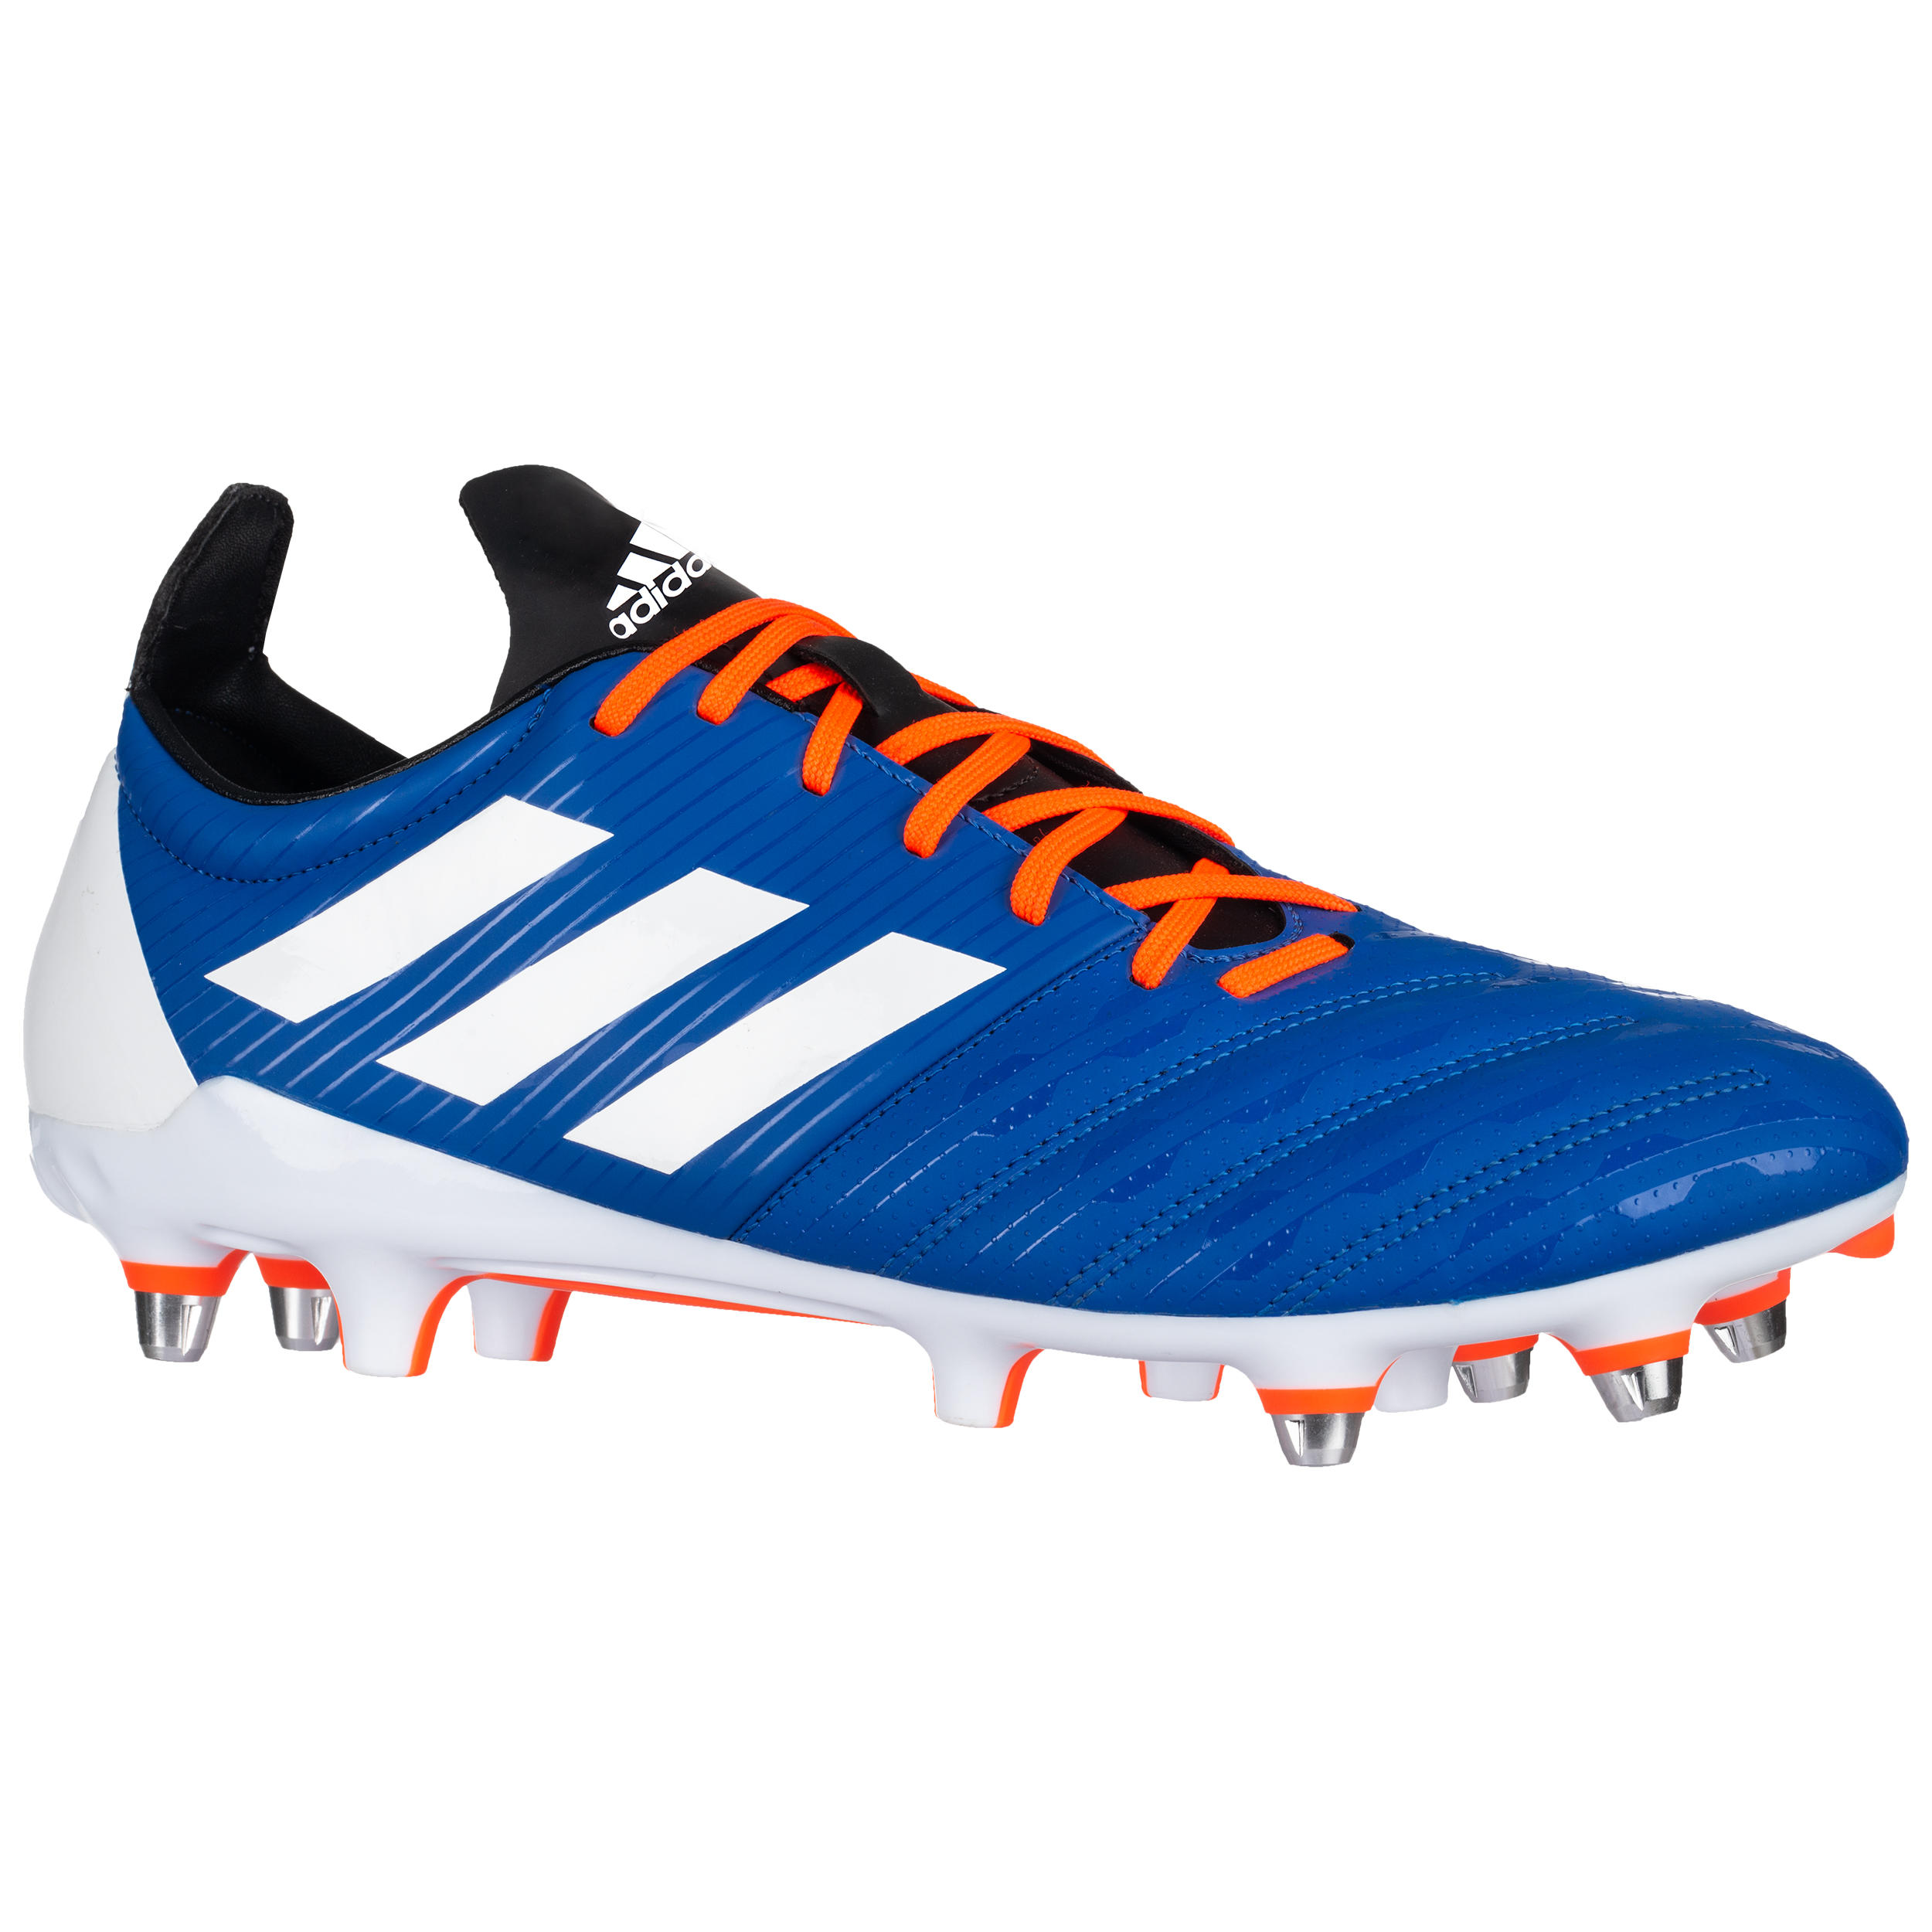 adida rugby boots